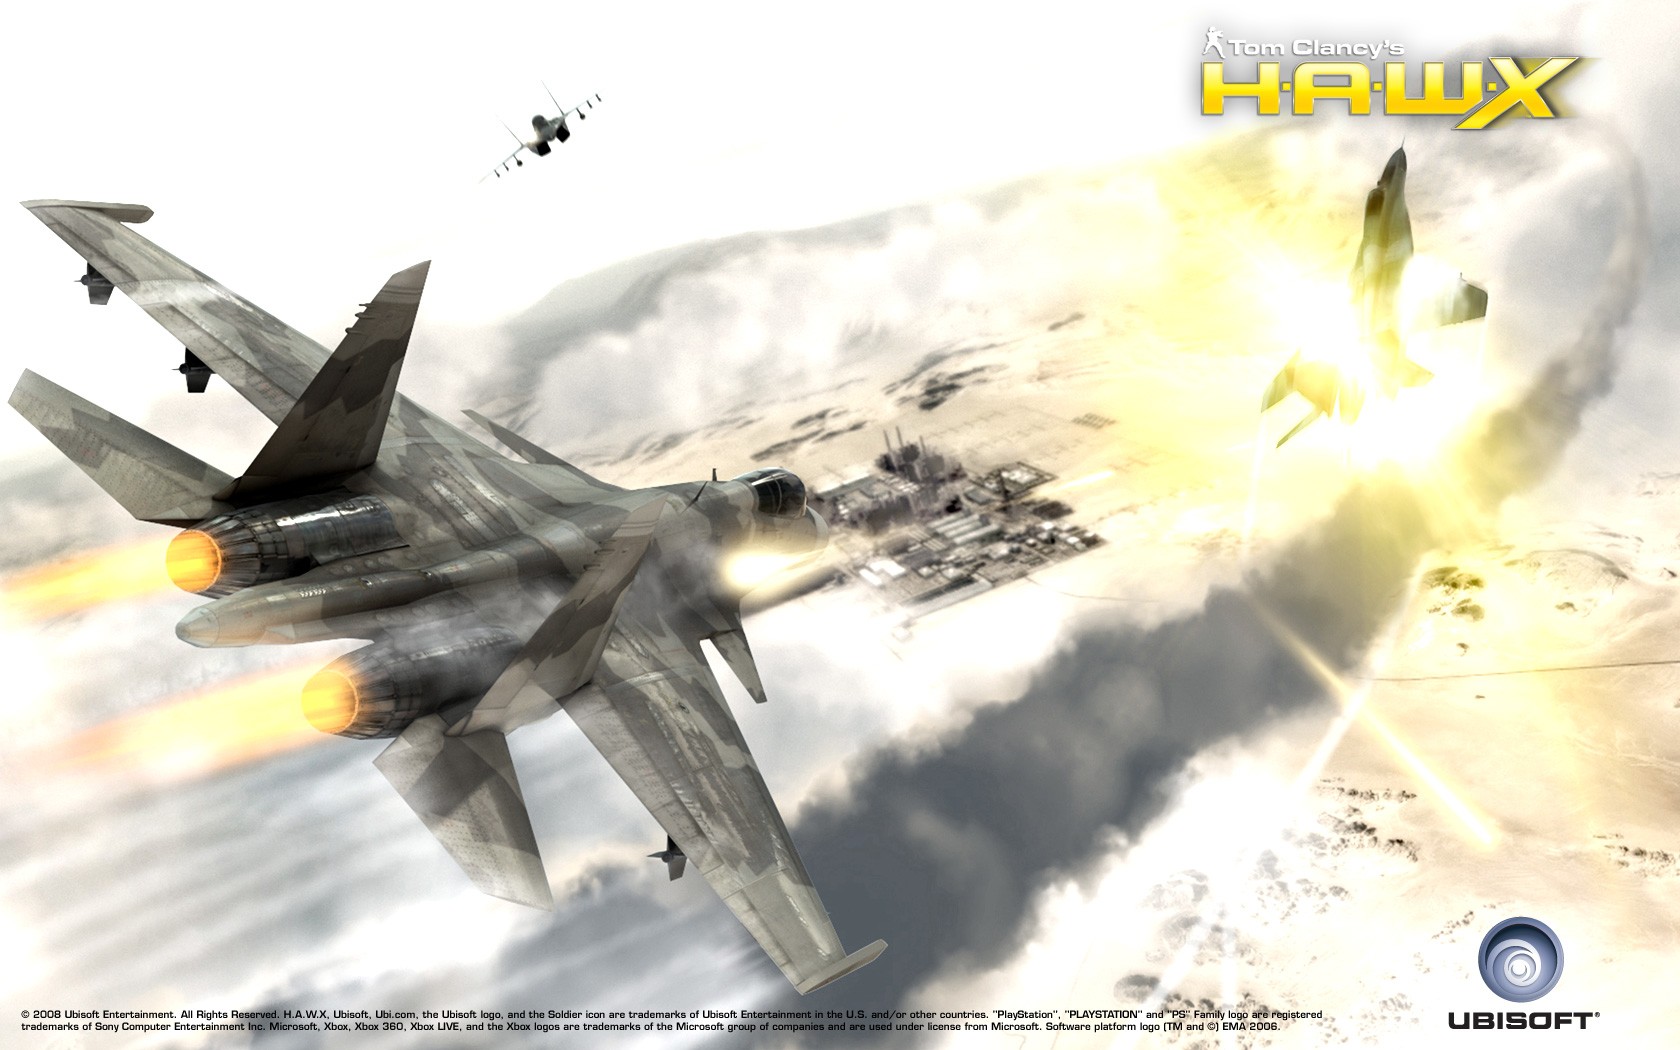 General 1680x1050 PC gaming jet fighter Tom Clancy's Tom Clancy's HAWX Ubisoft 2008 (Year) military aircraft video game art vehicle military vehicle